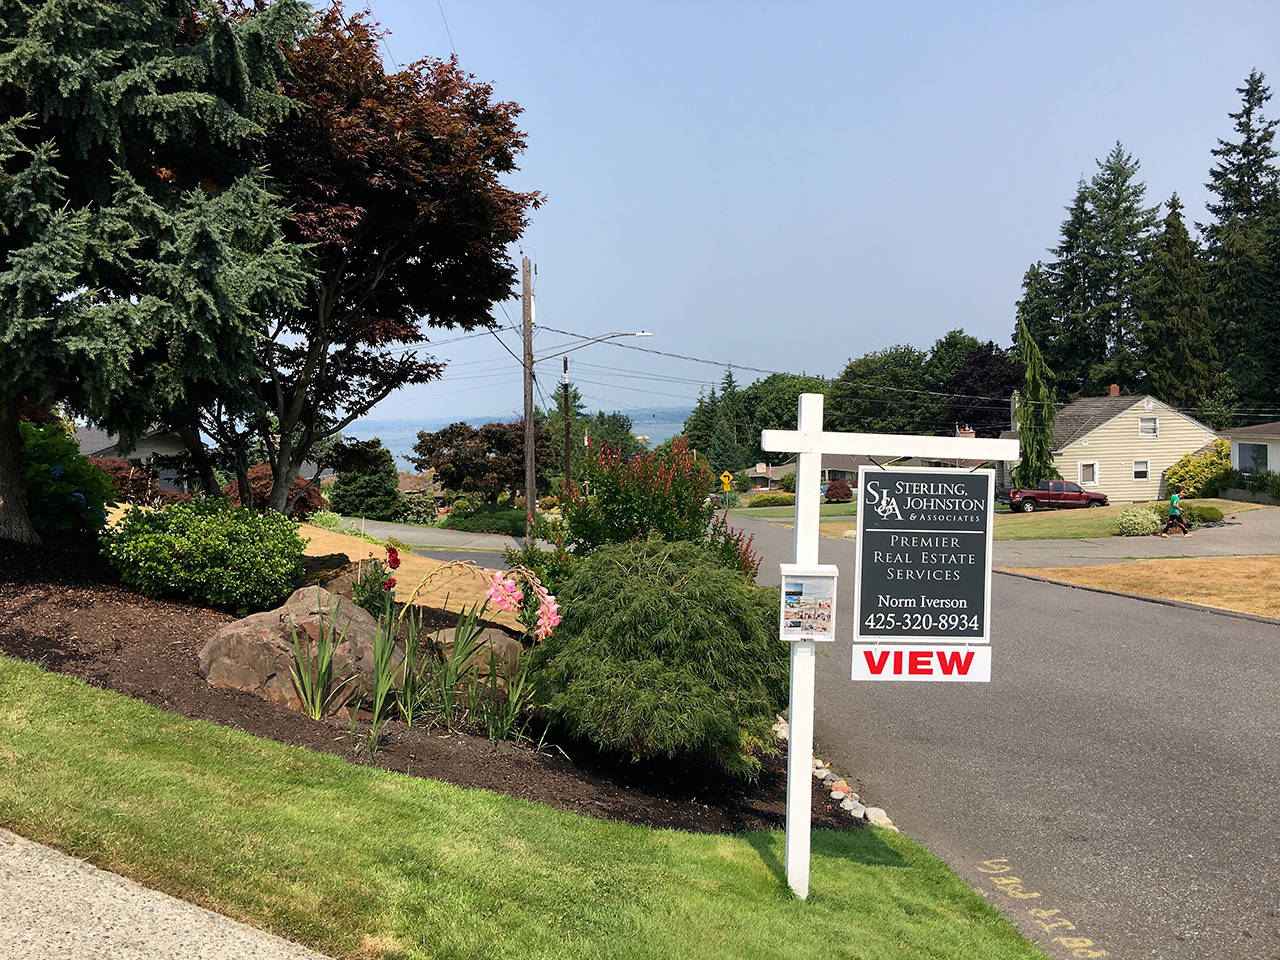 For the seventh month in a row, median homes prices in Snohomish County remained above $400,000. (File photo)